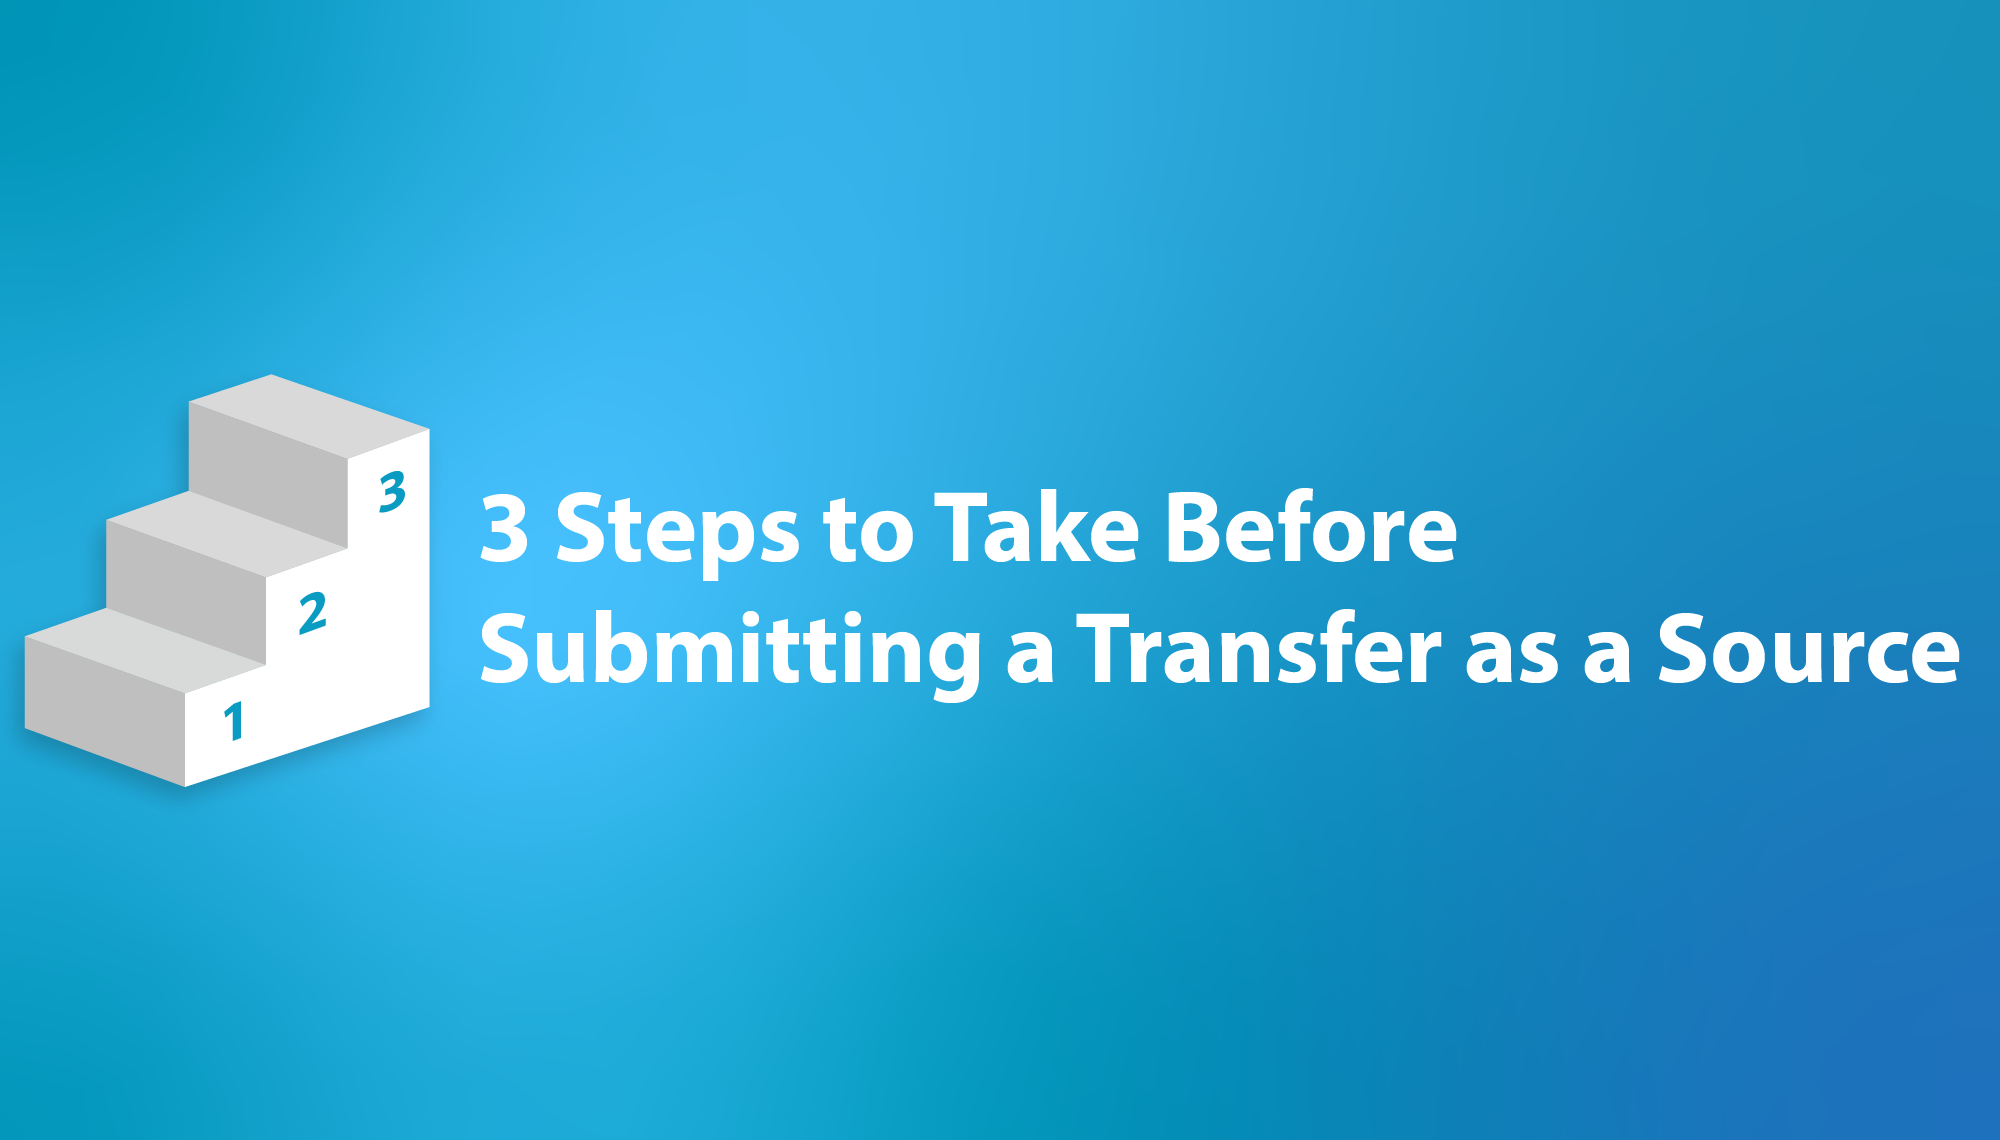 3 Steps to Take Before Submitting a Transfer as a Source